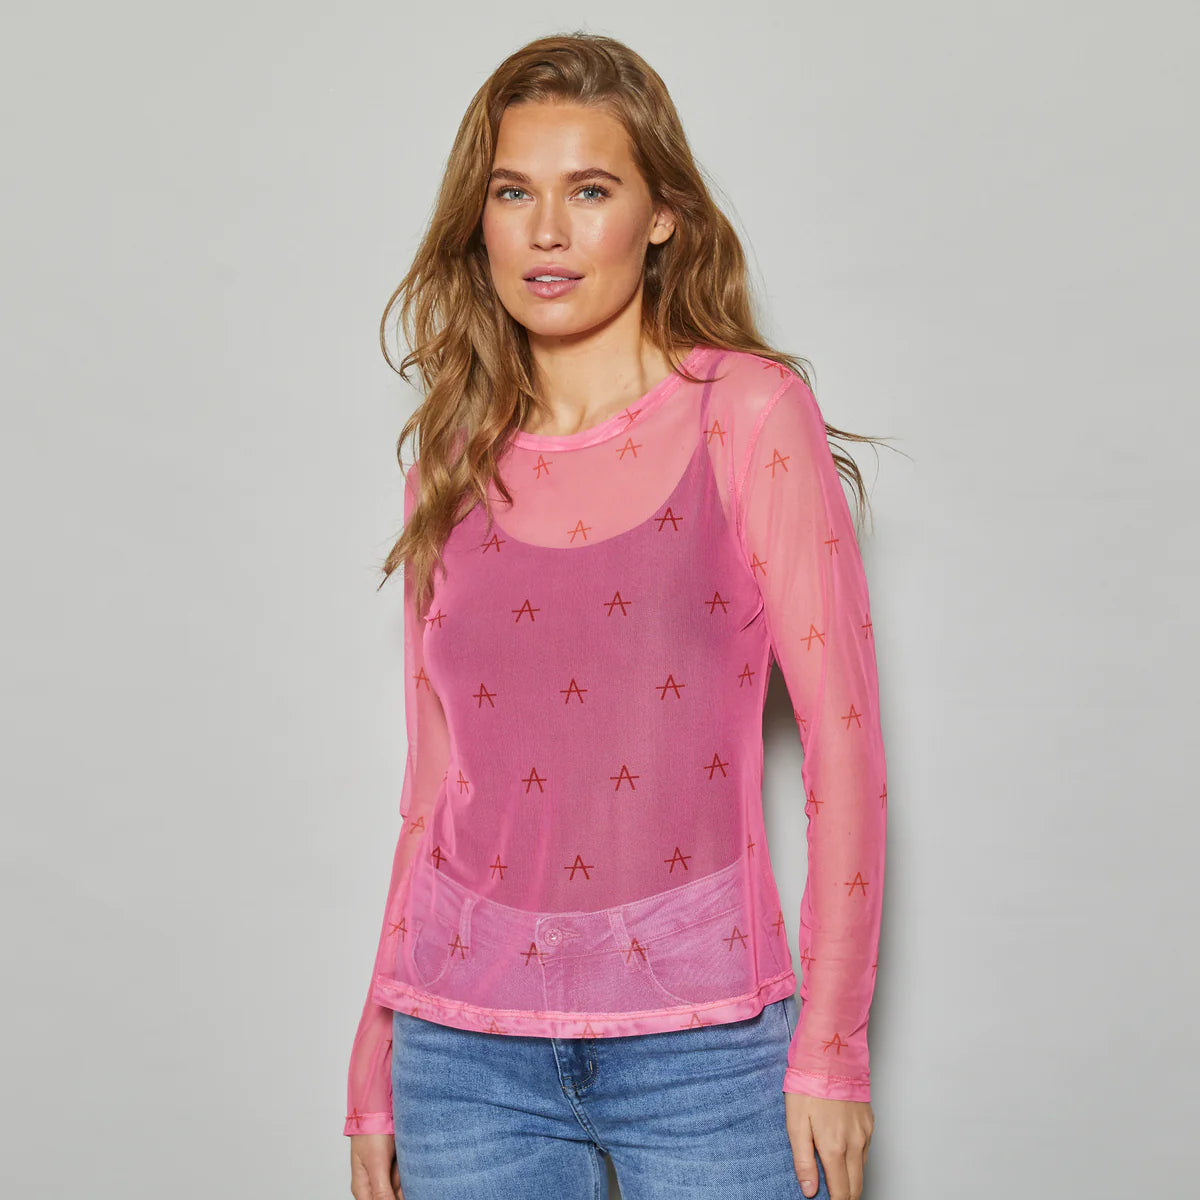 Fro mesh blouse Pink